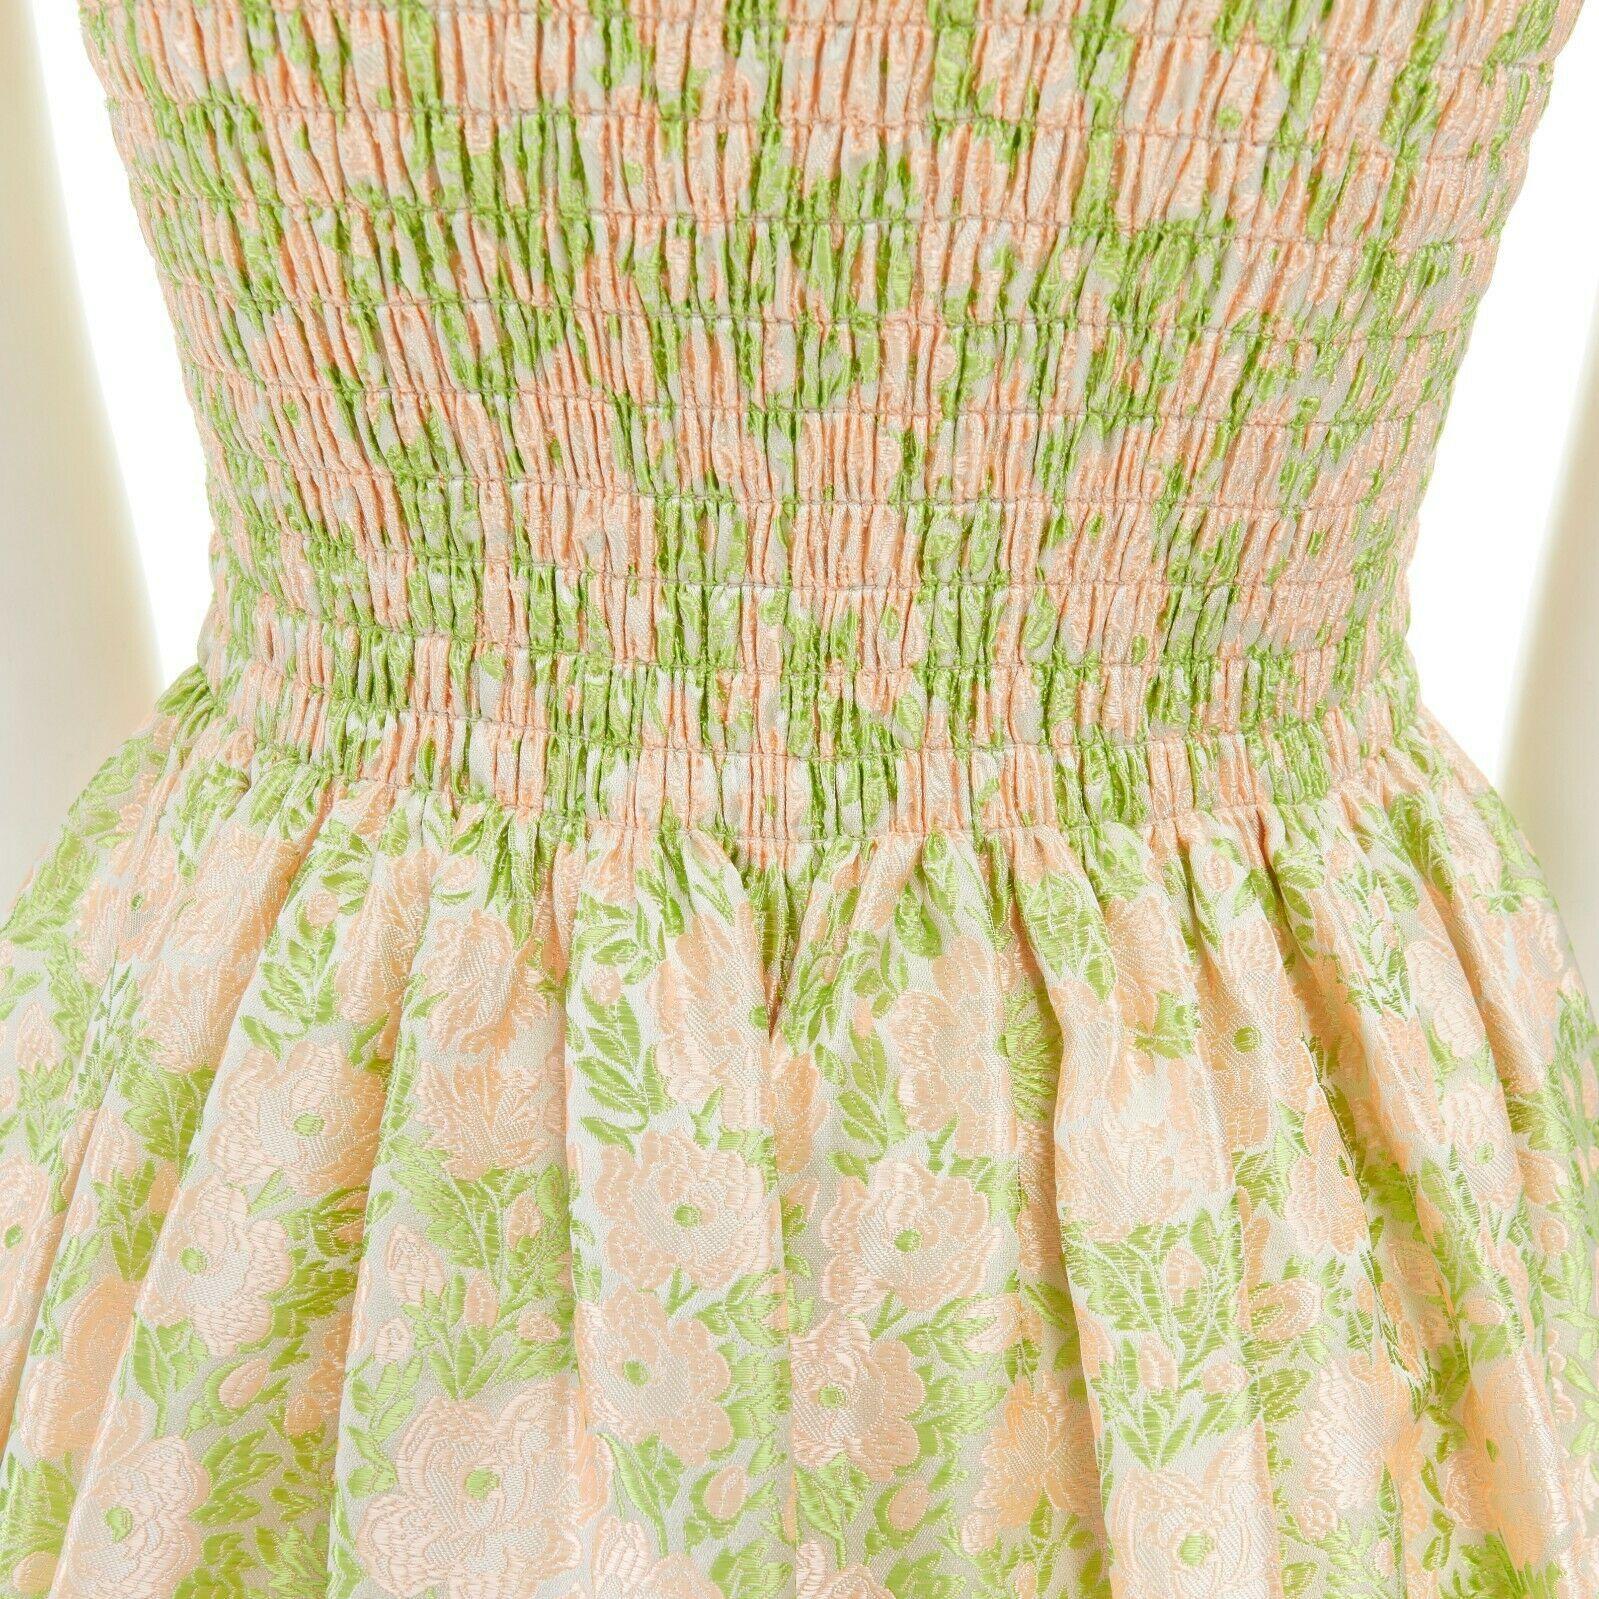 CALVIN KLEIN 205W39NYC pink green brocade ruched bodice evening dress US0 XS 1